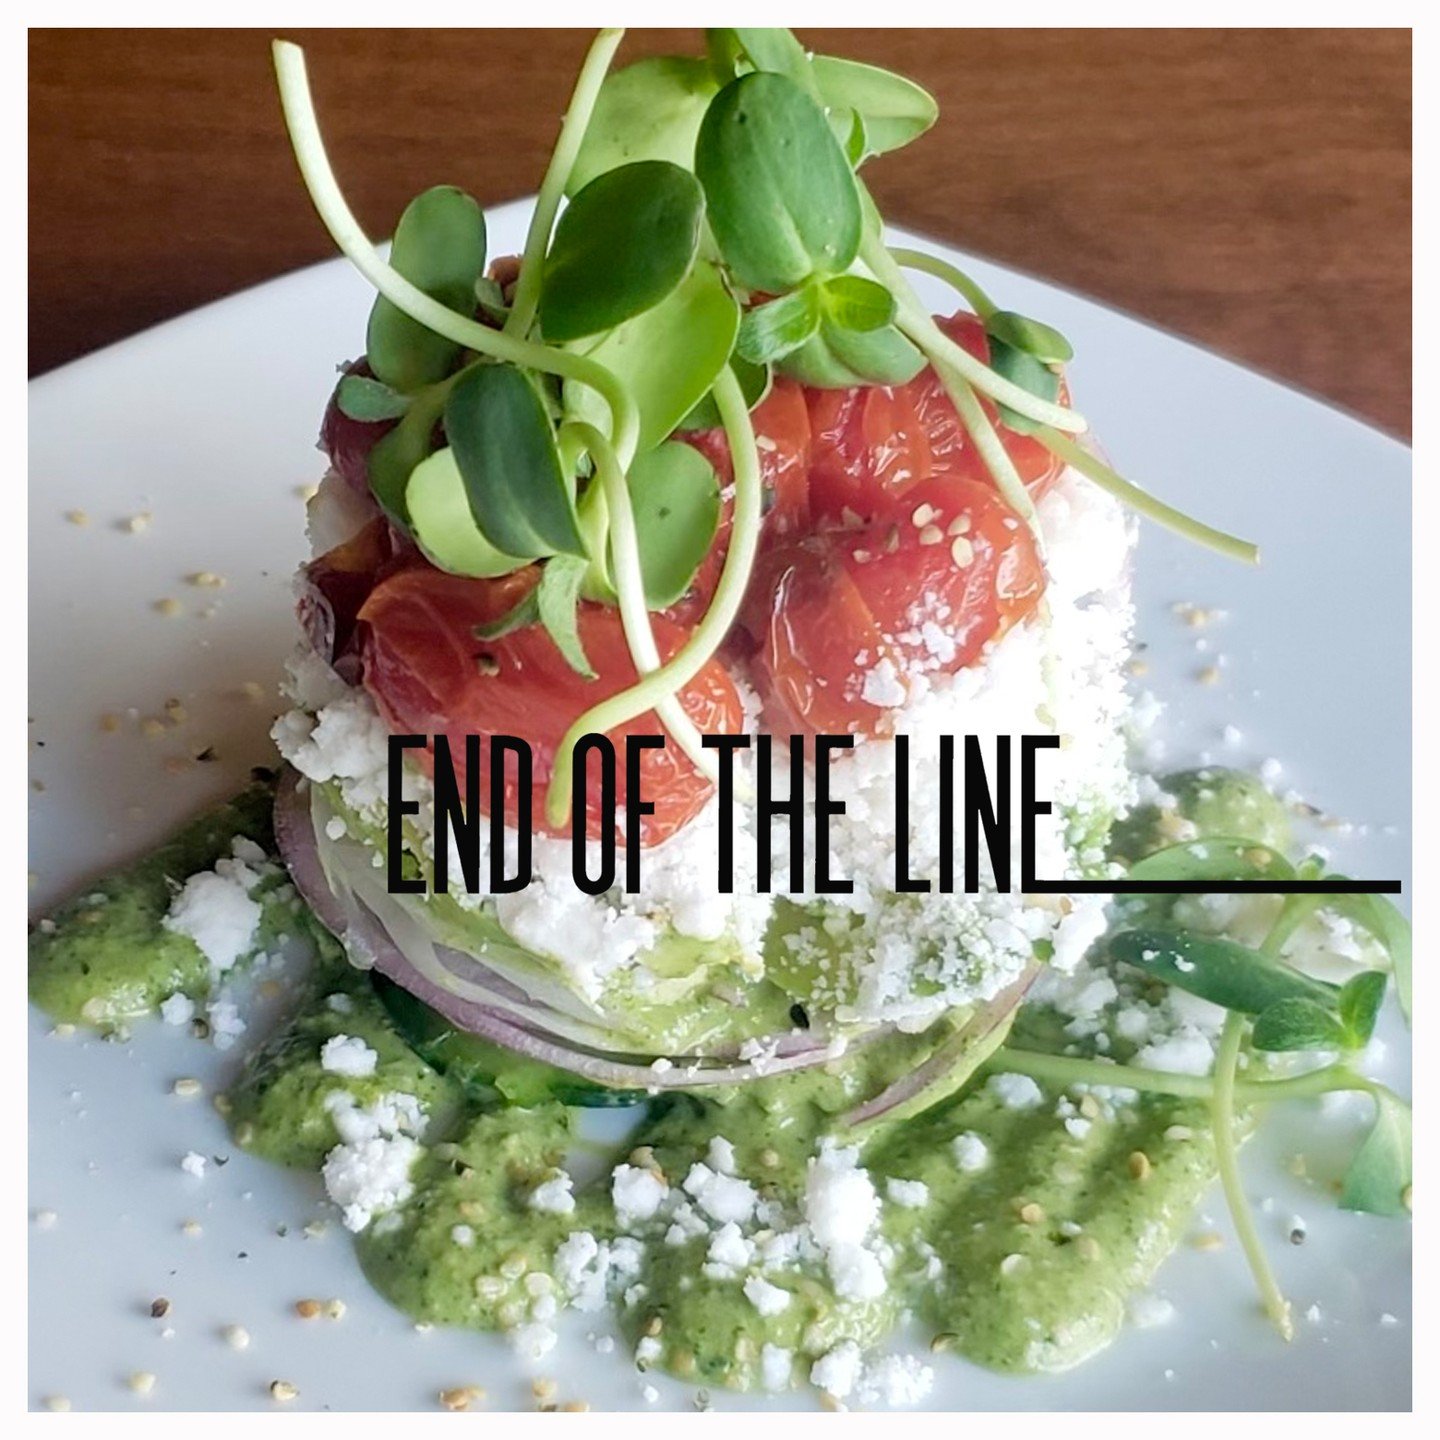 Summer Fresh Stacked Salad
Avocado, red onions, cucumber, and feta cheese, stacked with a red wine herb vinaigrette, and finished with sunflower sprouts and toasted hemp hearts.

#downtownpensacola #saucyvegans #veganspecials #gulfcoastliving #health